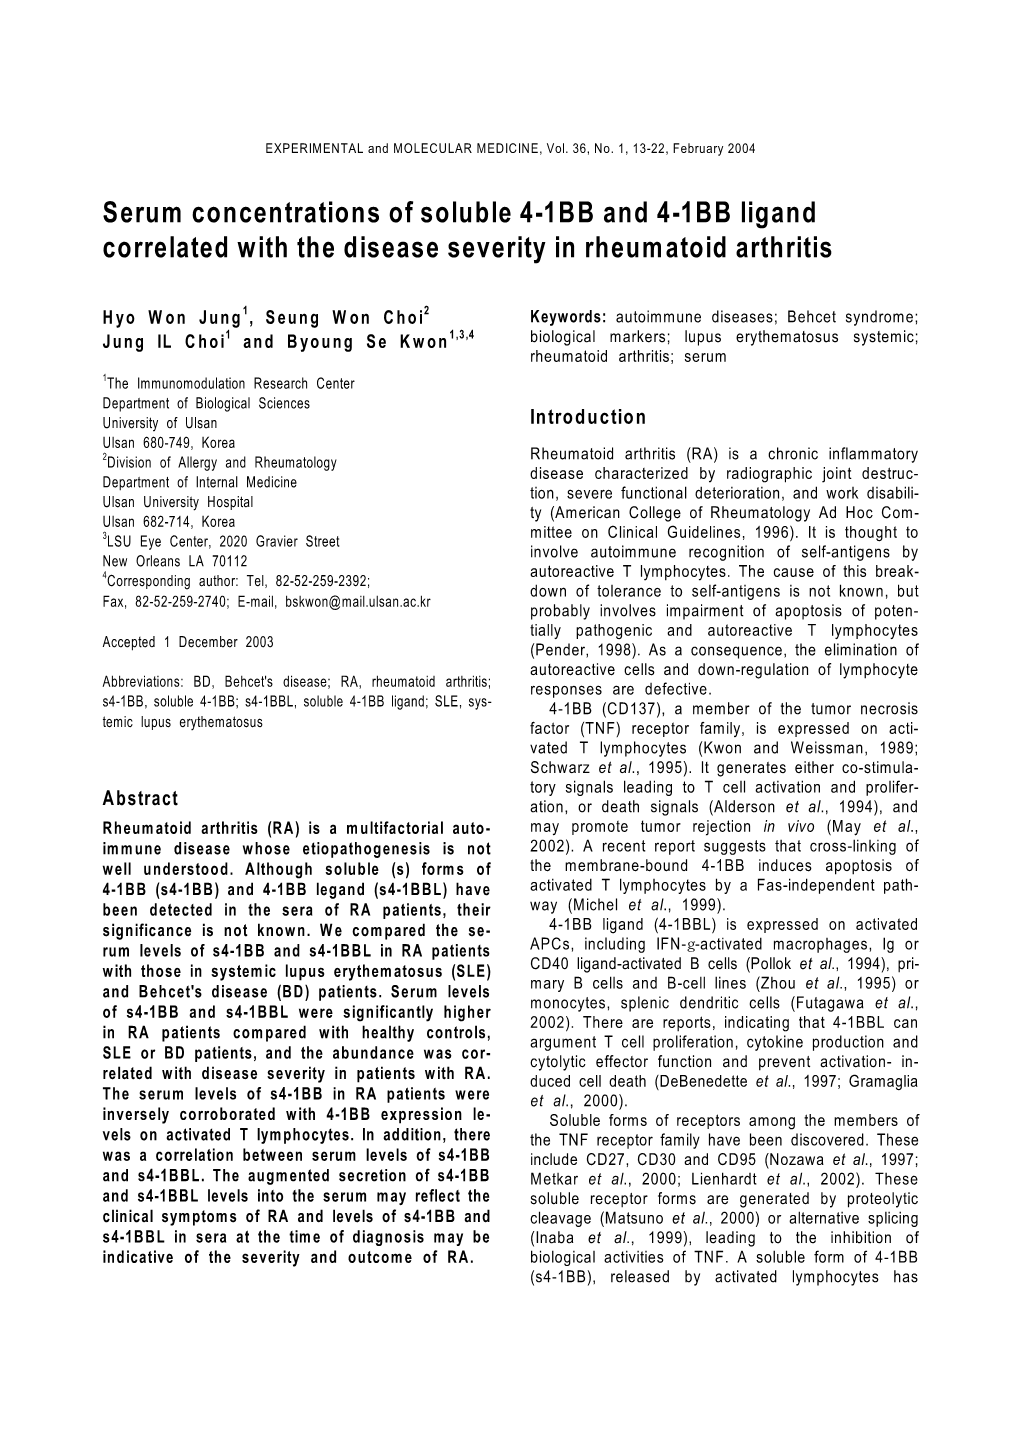 Serum Concentrations of Soluble 4-1BB and 4-1BB Ligand Correlated with the Disease Severity in Rheumatoid Arthritis